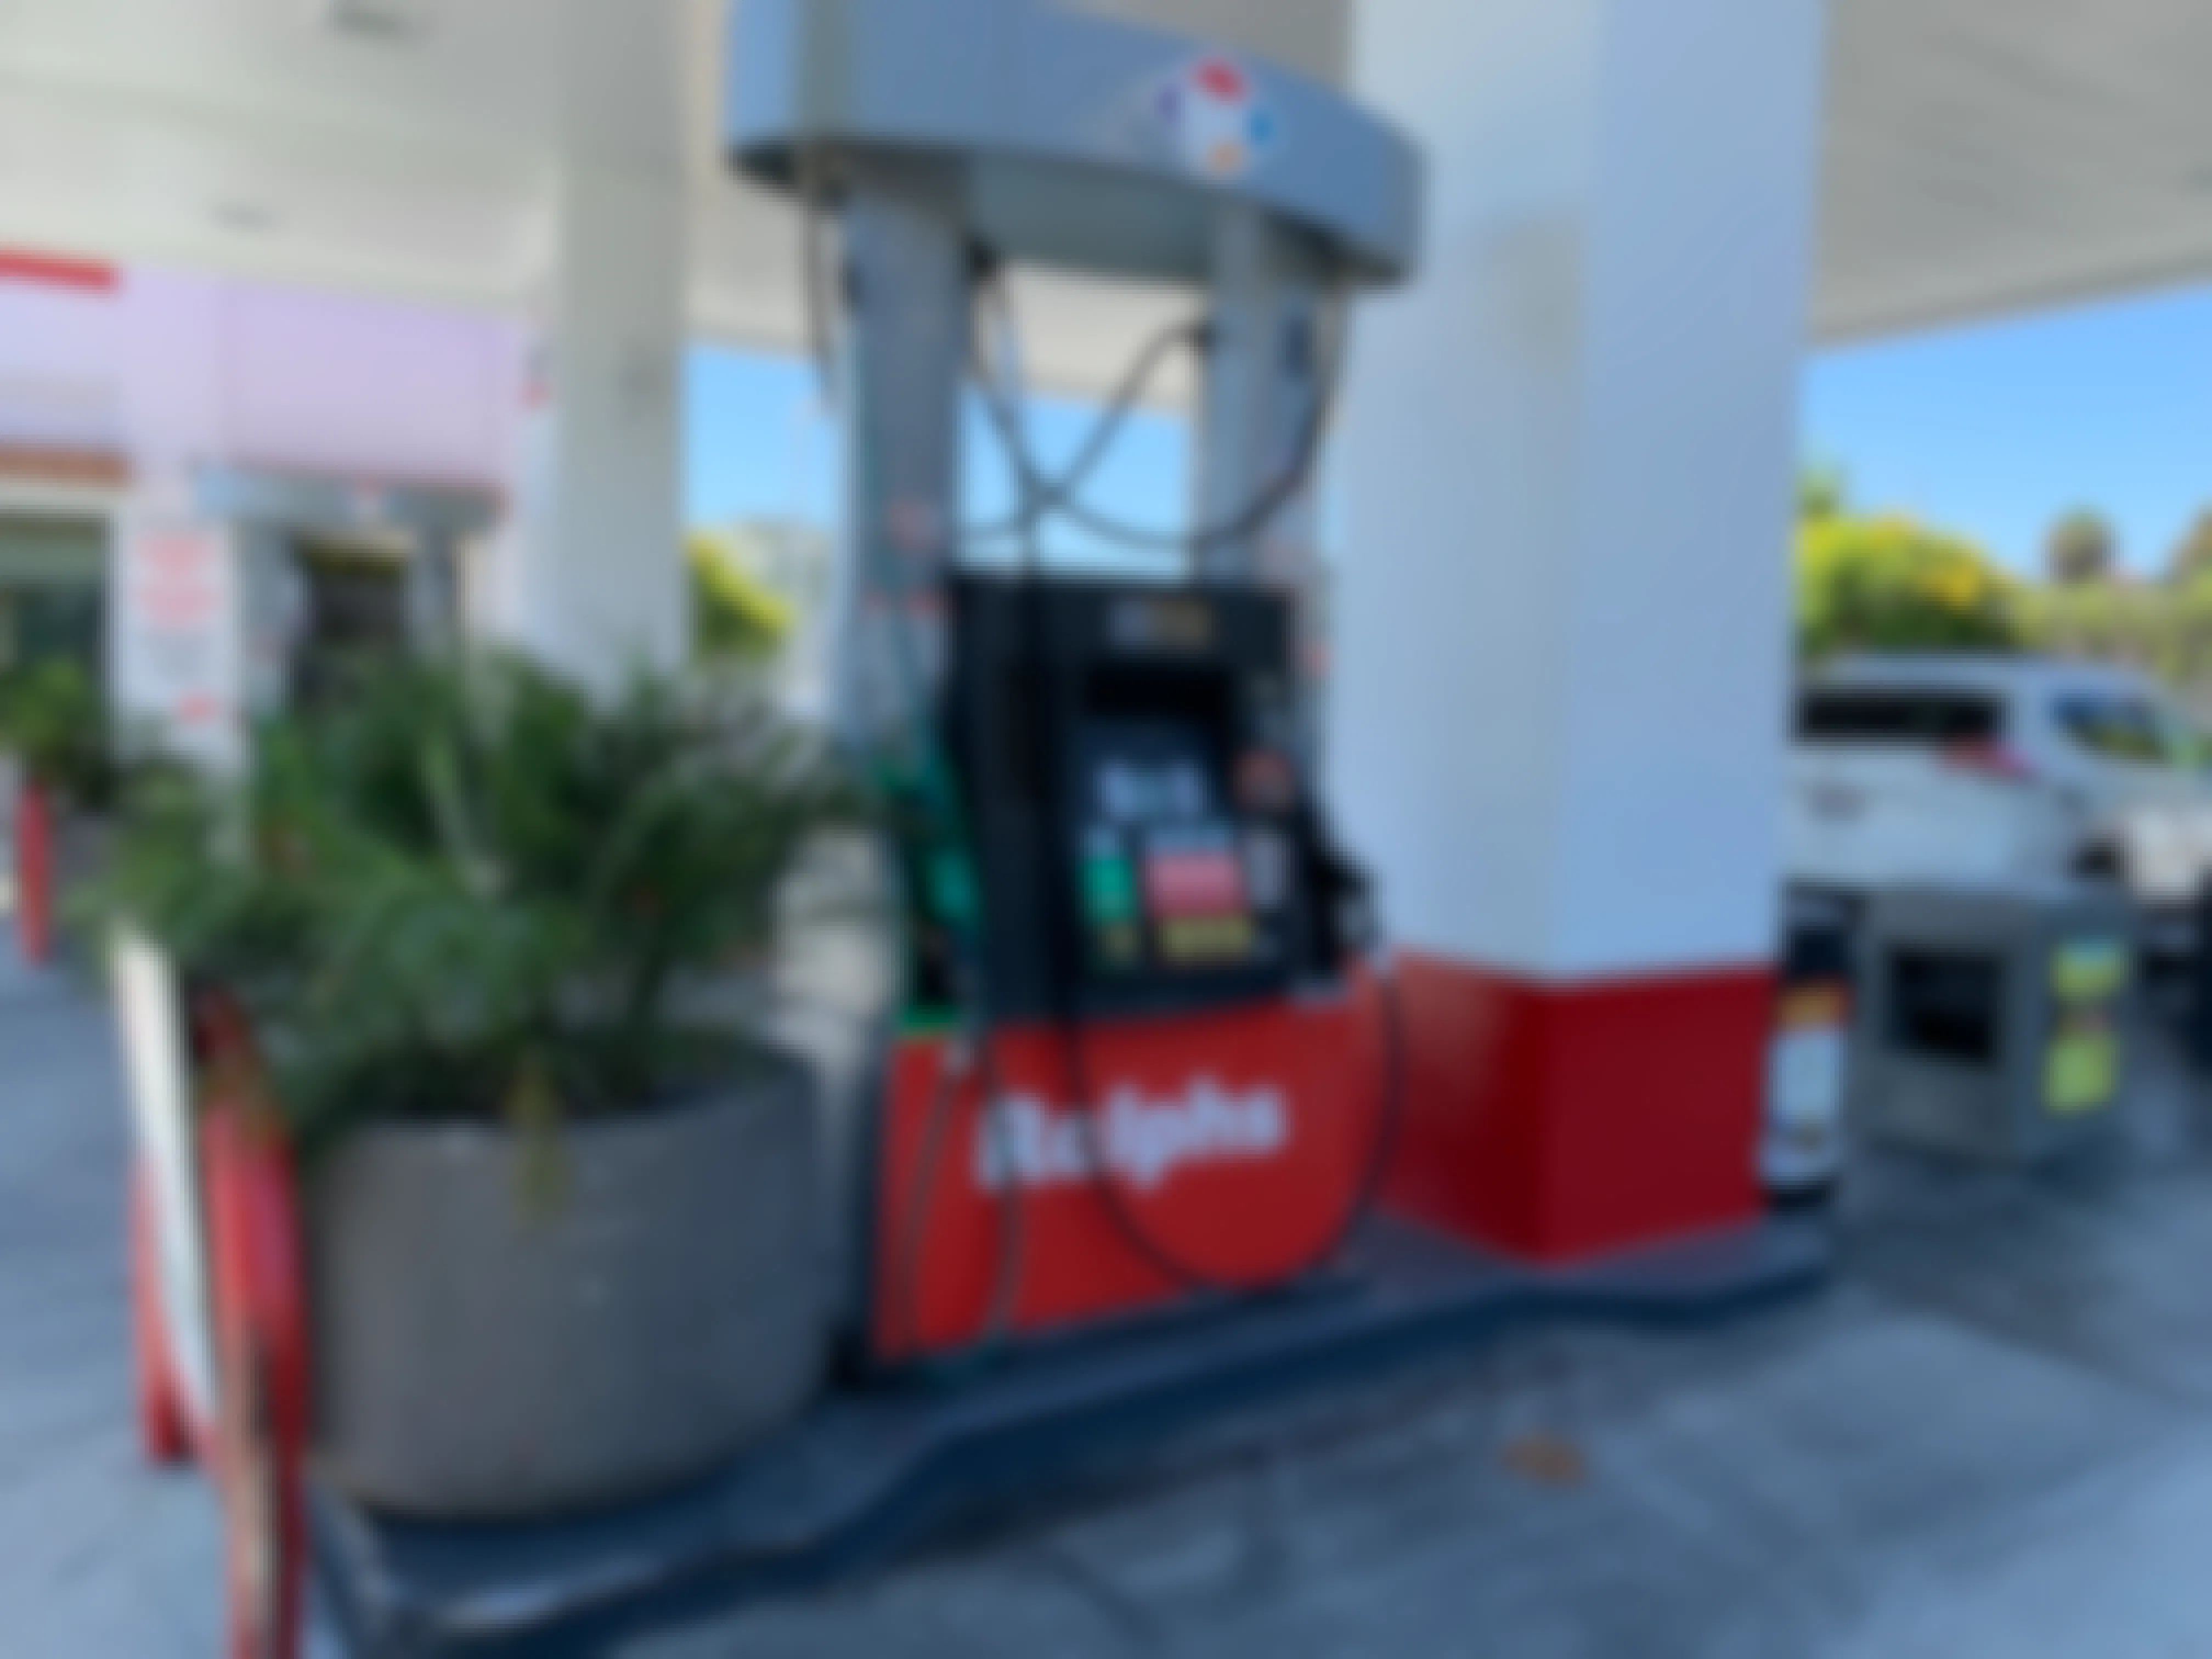 ralphs fueling station pump in california